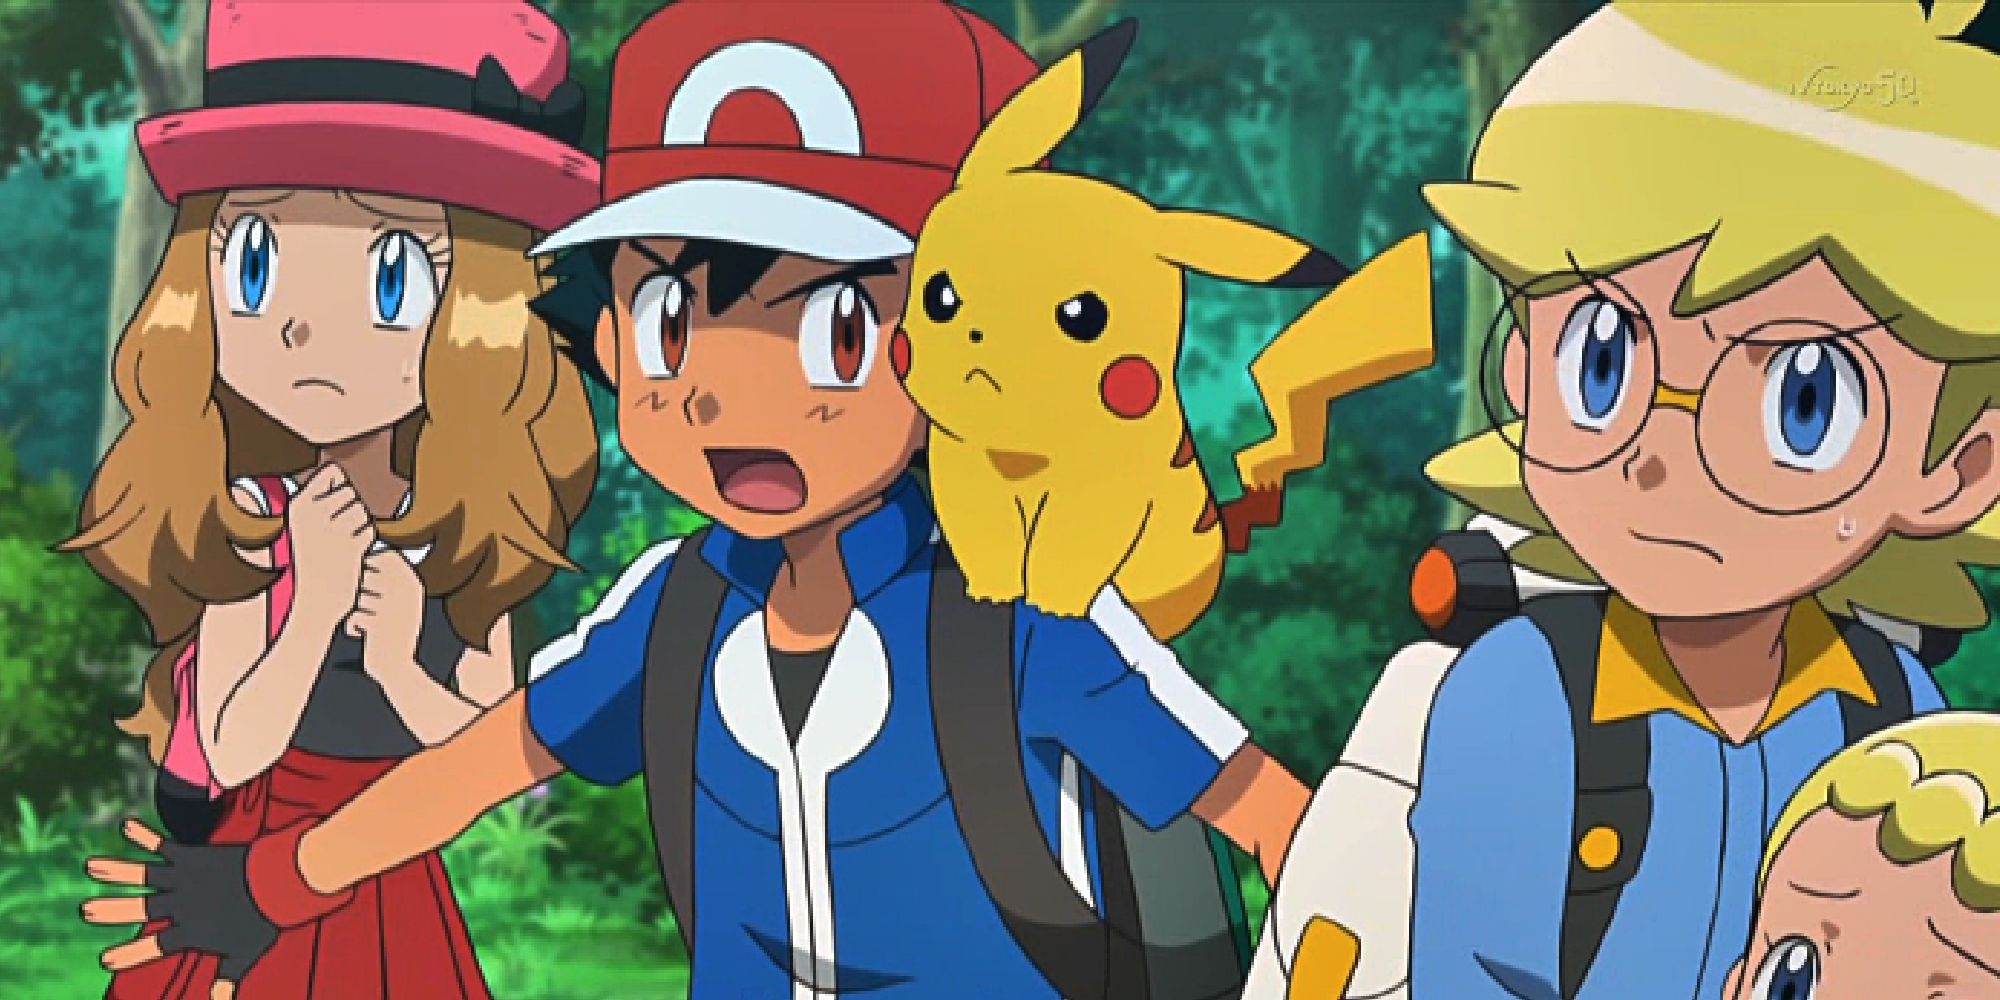 Ash and Clemont protecting Serena and Bonnie in a forest